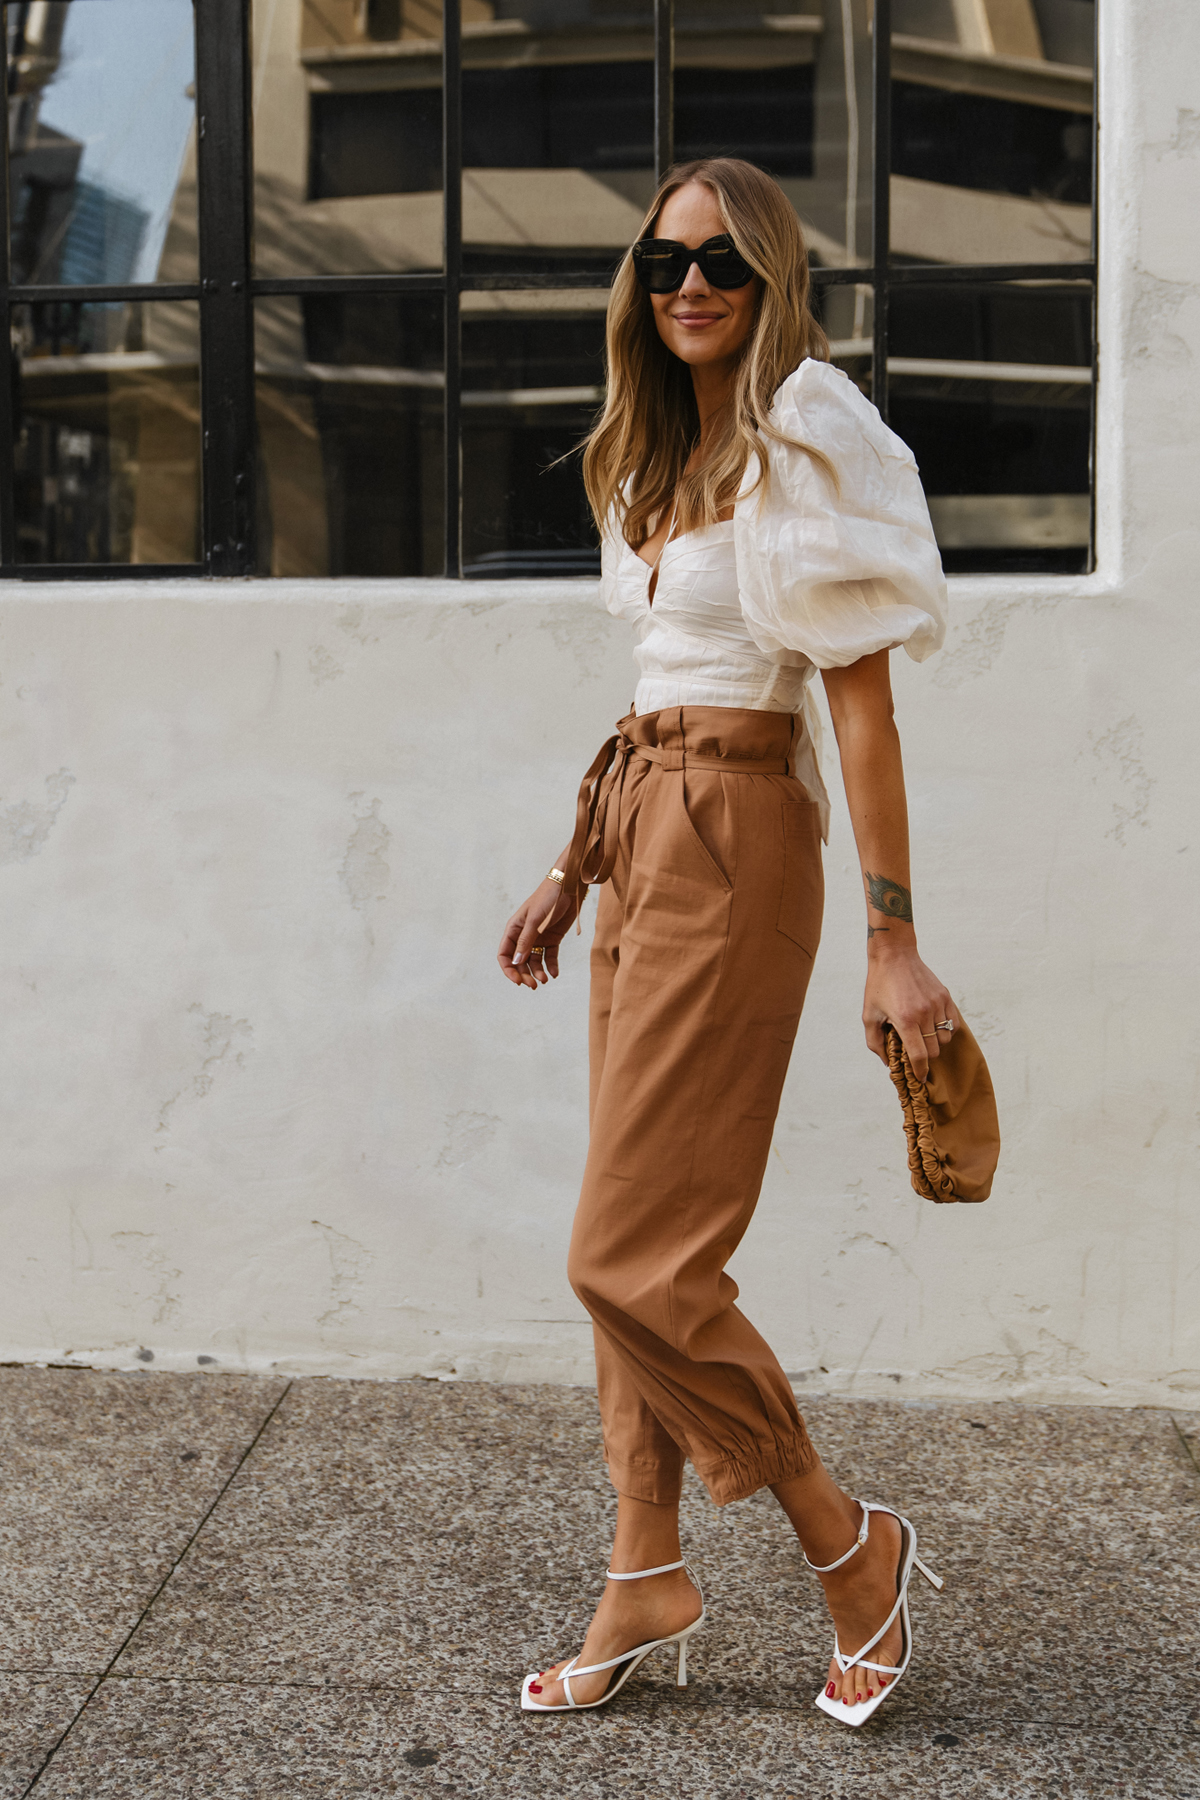 Fashion Jackson Wearing puff sleeve crop top outfit brown pants womens outfit bottega veneta stretch sandals white chic spring outfit 2022 street style